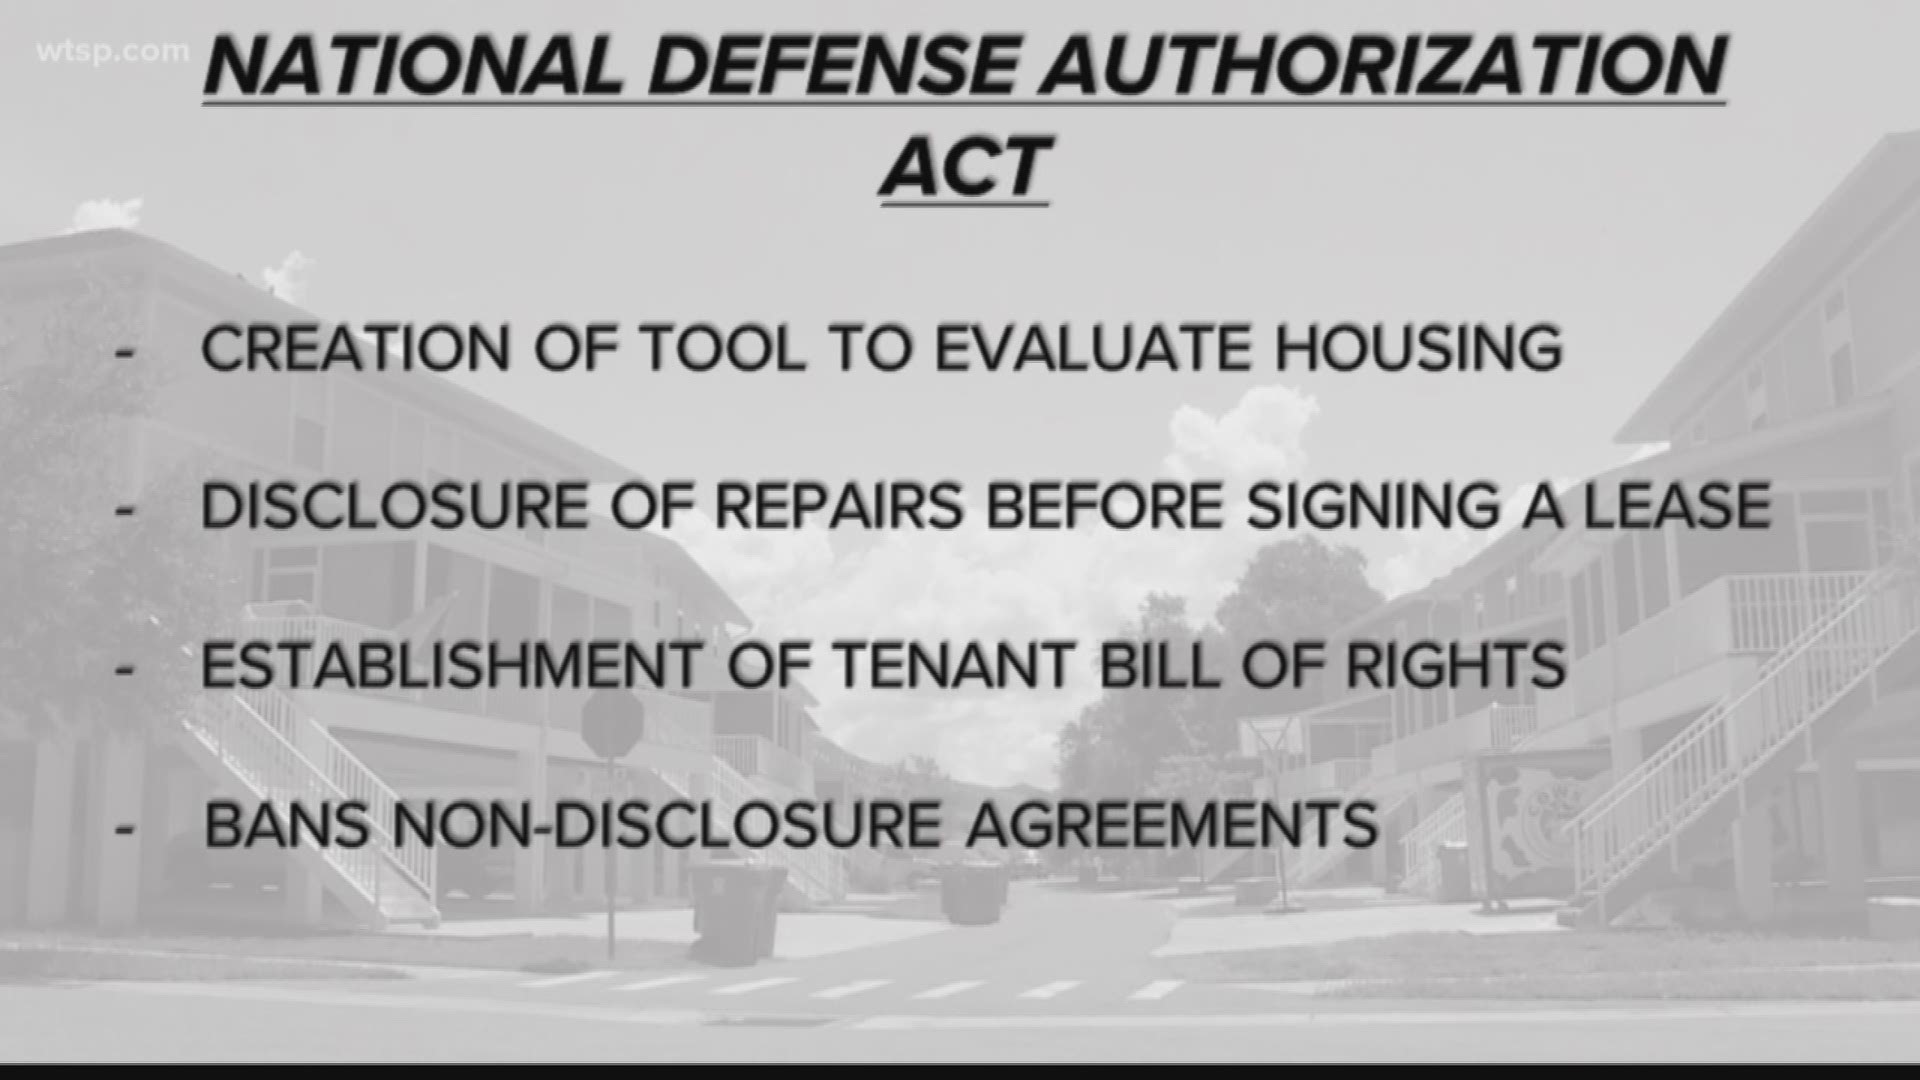 The National Defense Authorization Act or NDAA released the most "substantial overhaul" of the Privatized Military Housing Initiative since it was created in 1996.